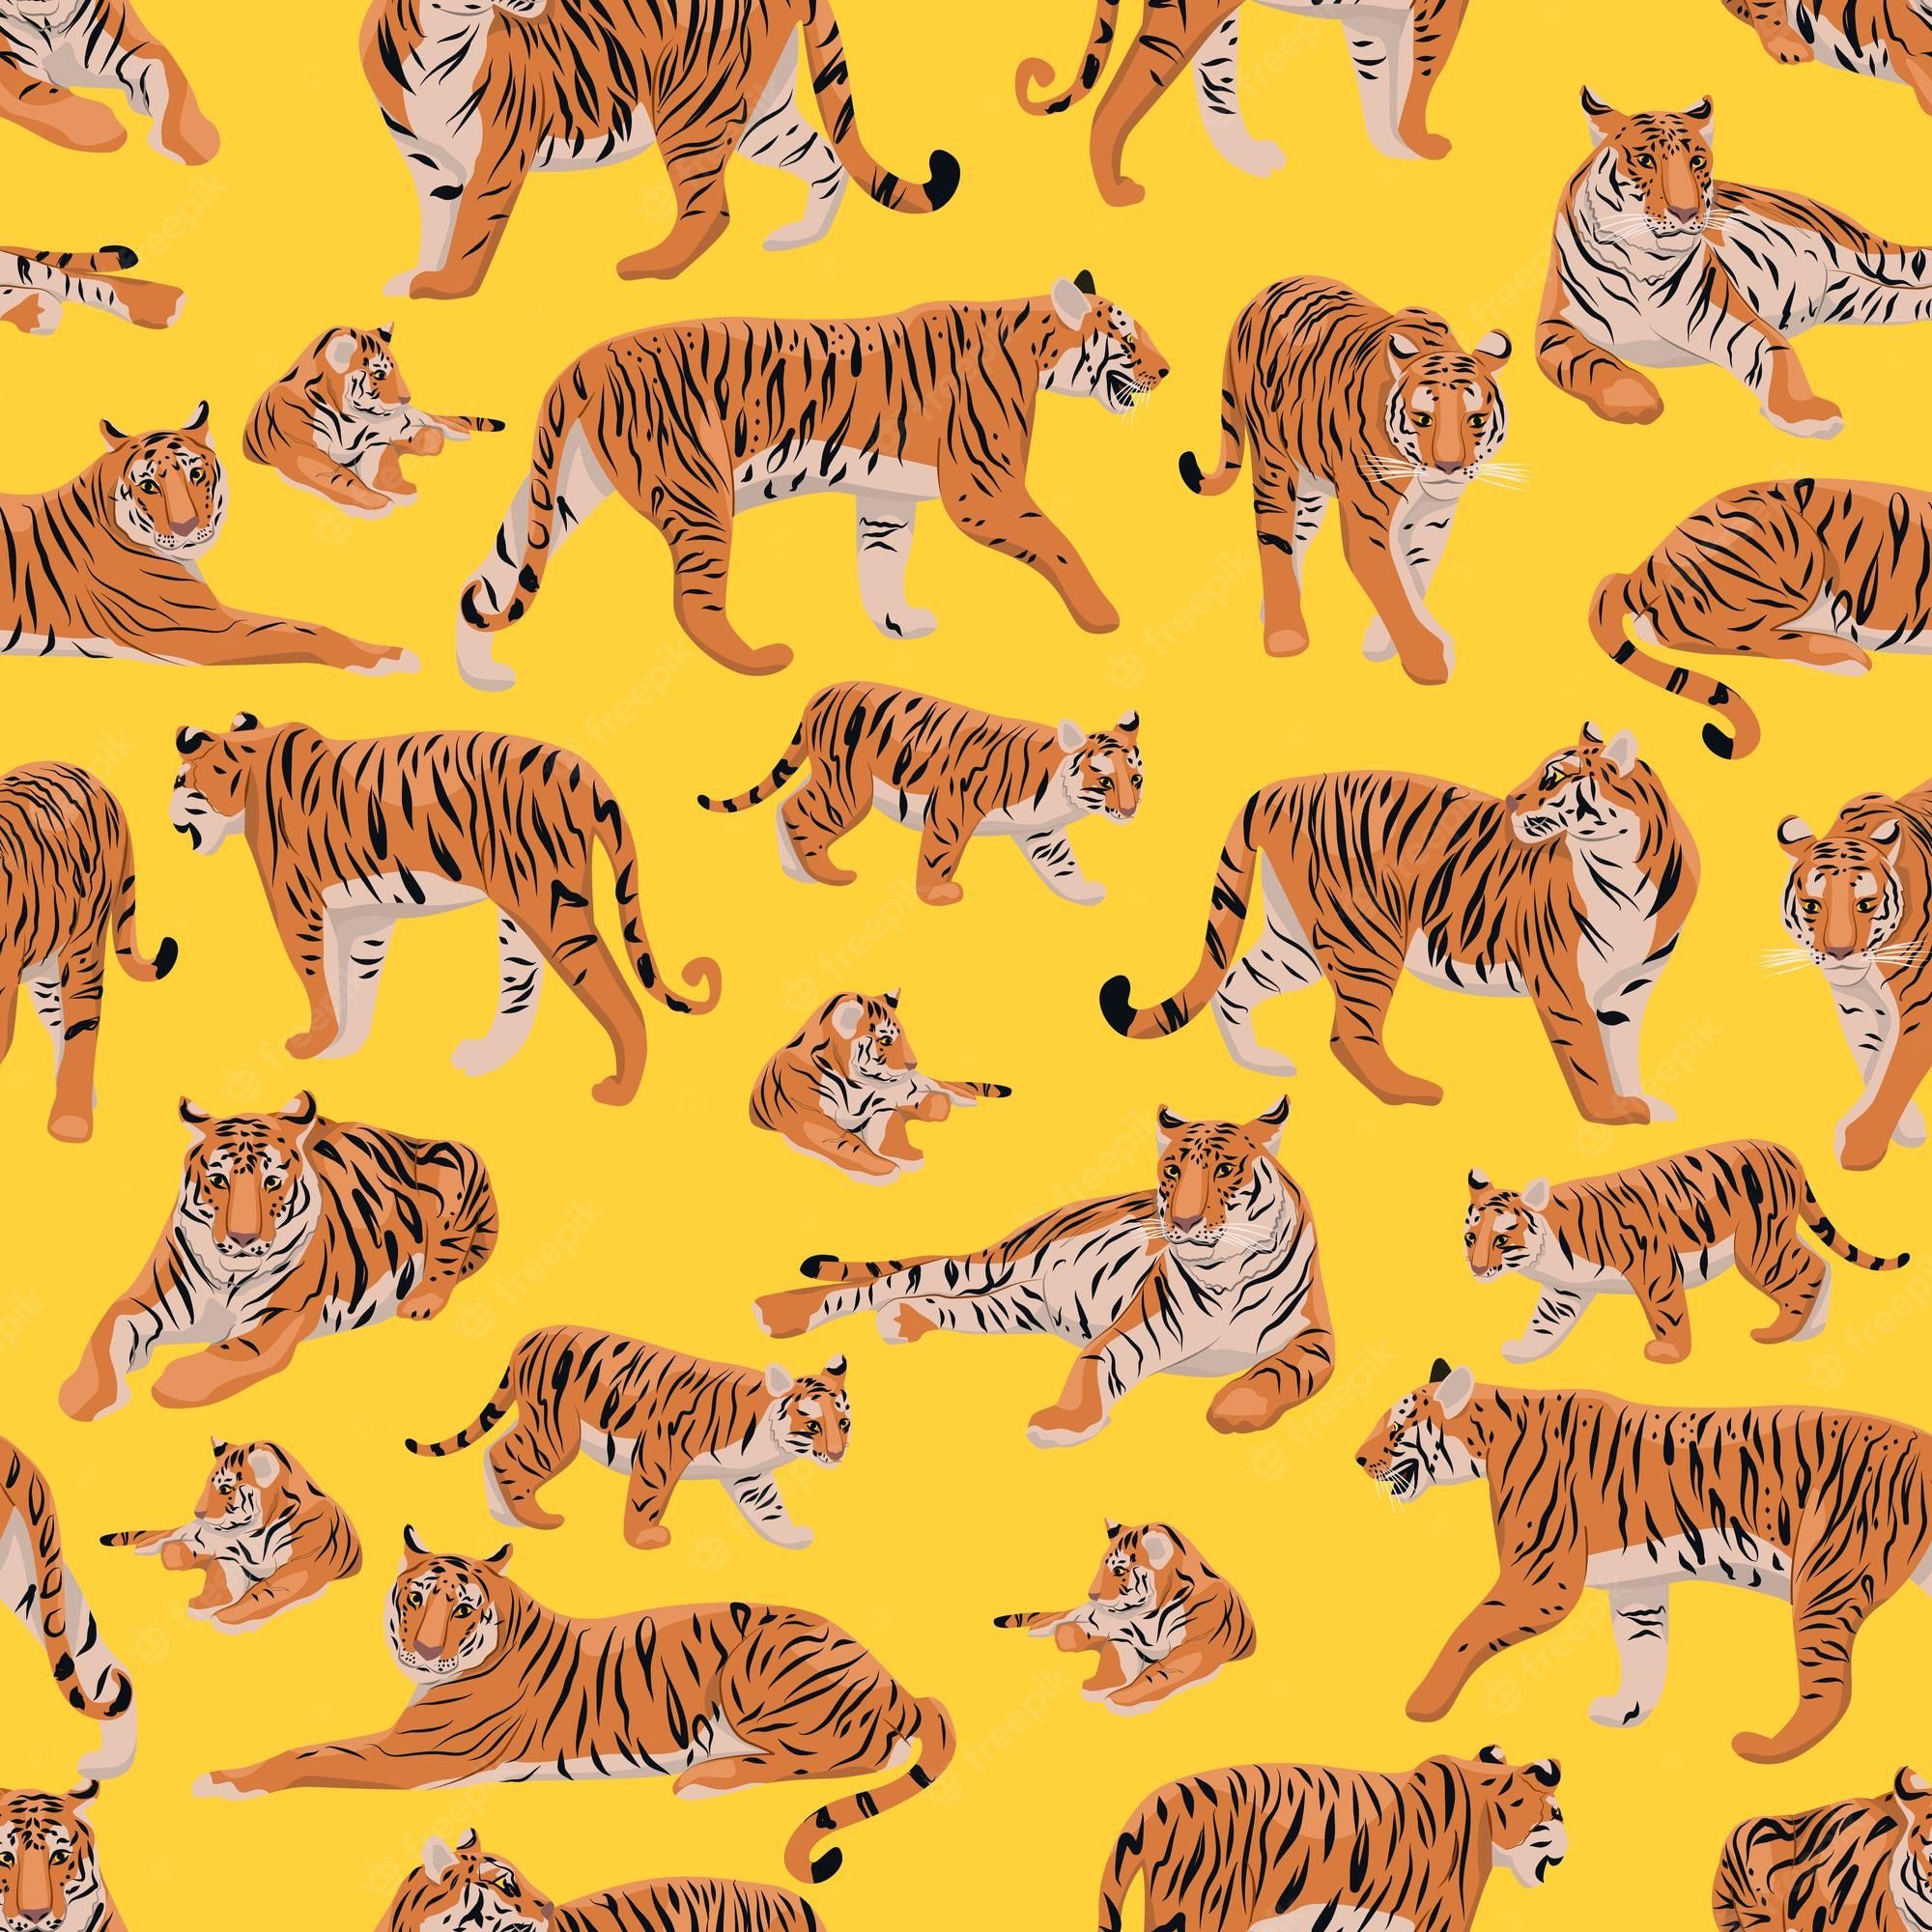 Pattern of tigers on a yellow background - Tiger